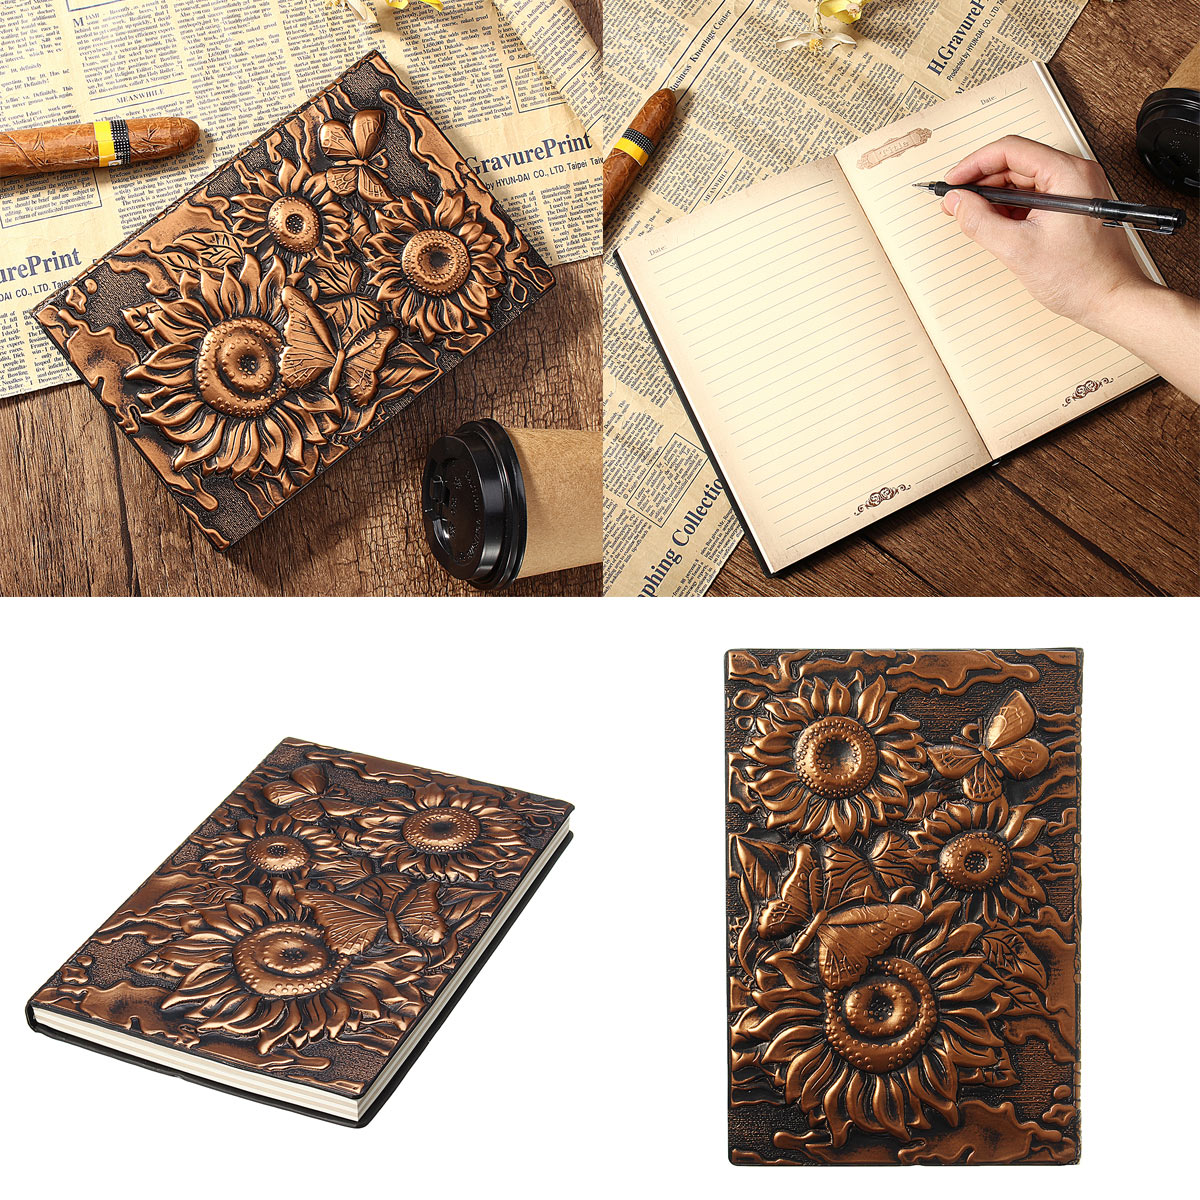 

Vintage 3D Embossed Sunflower Travel Diary Notebook Journal Leather Notepad